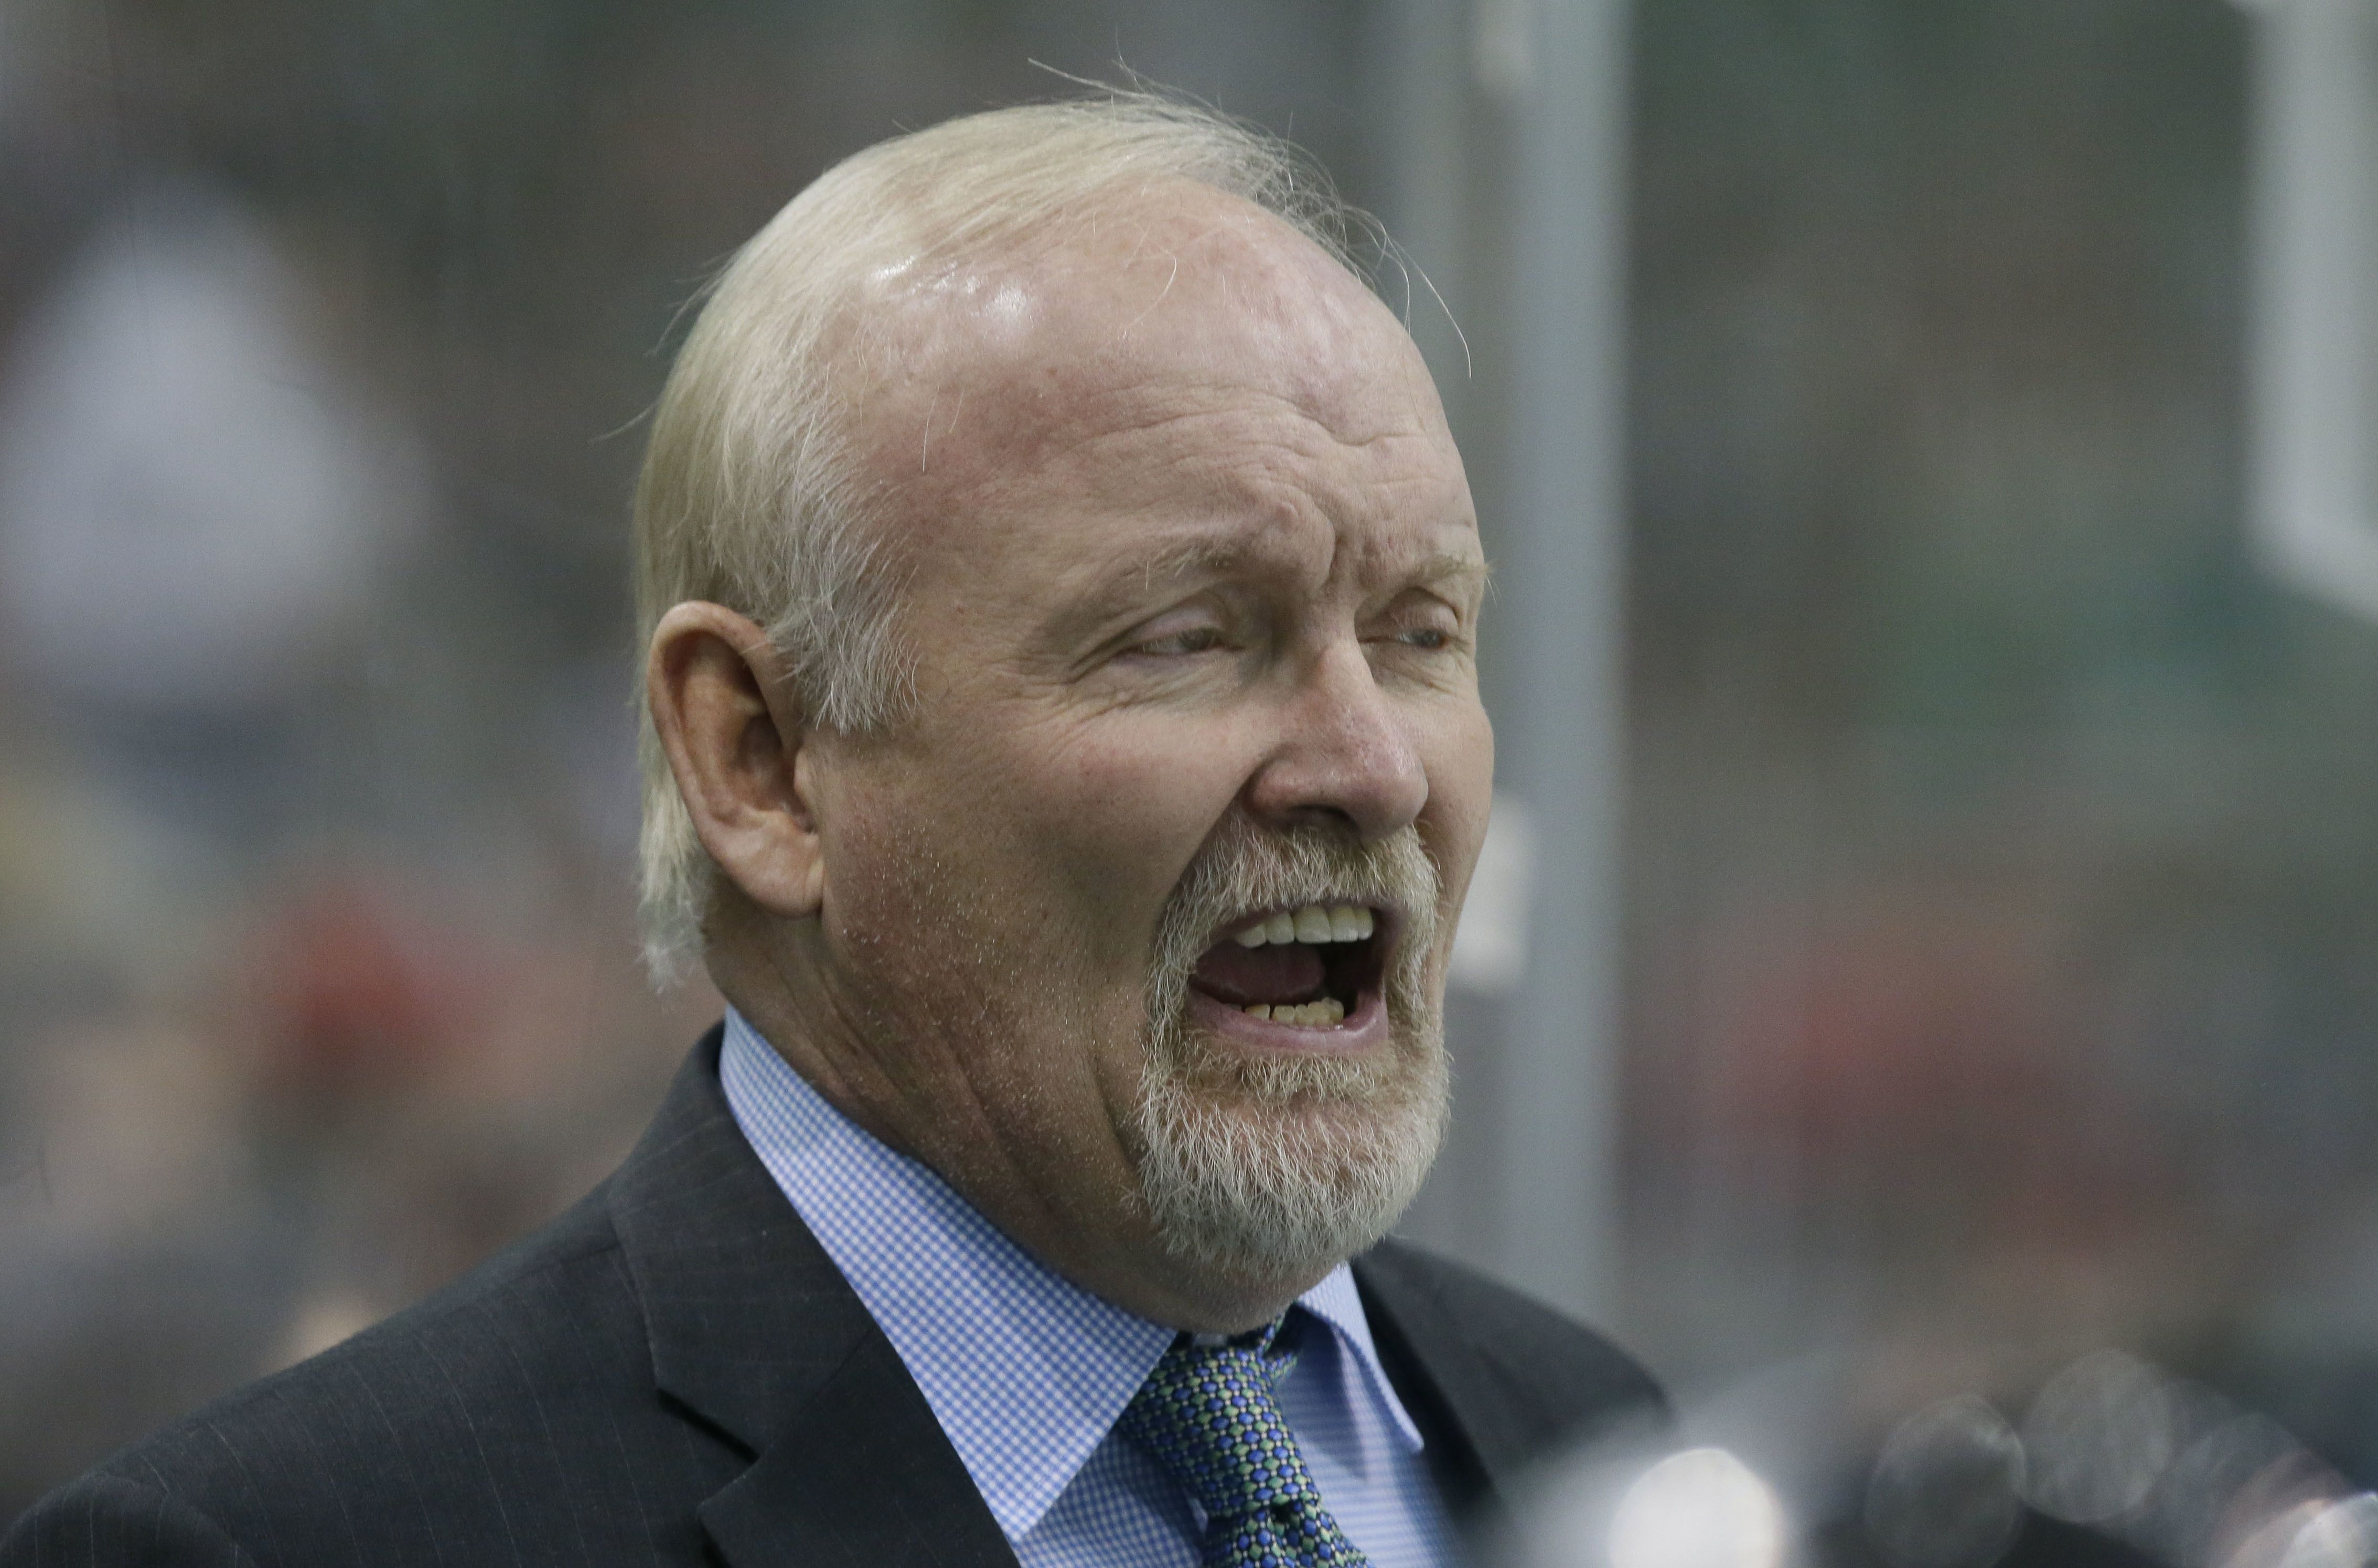 New York Rangers: What does history say about Lindy Ruff as a coach? - Page  5